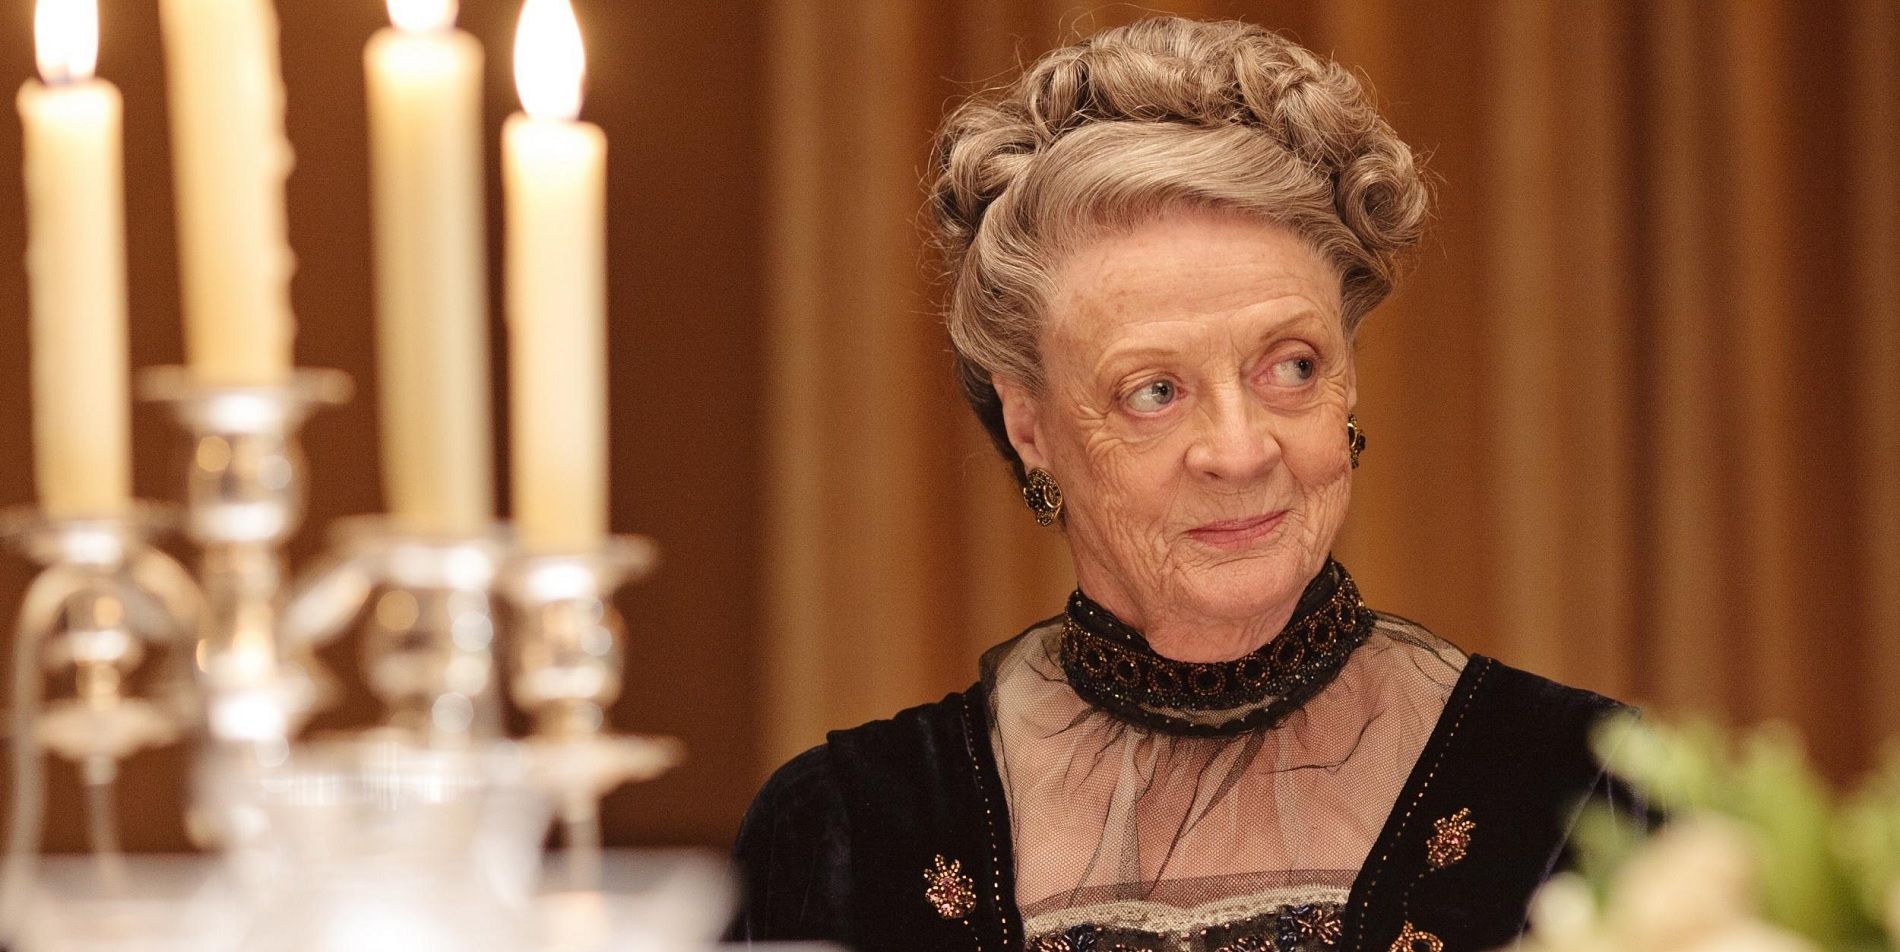 Dowager Countess Lady Violet Crawley smiling at the dinner table in Downton Abbey